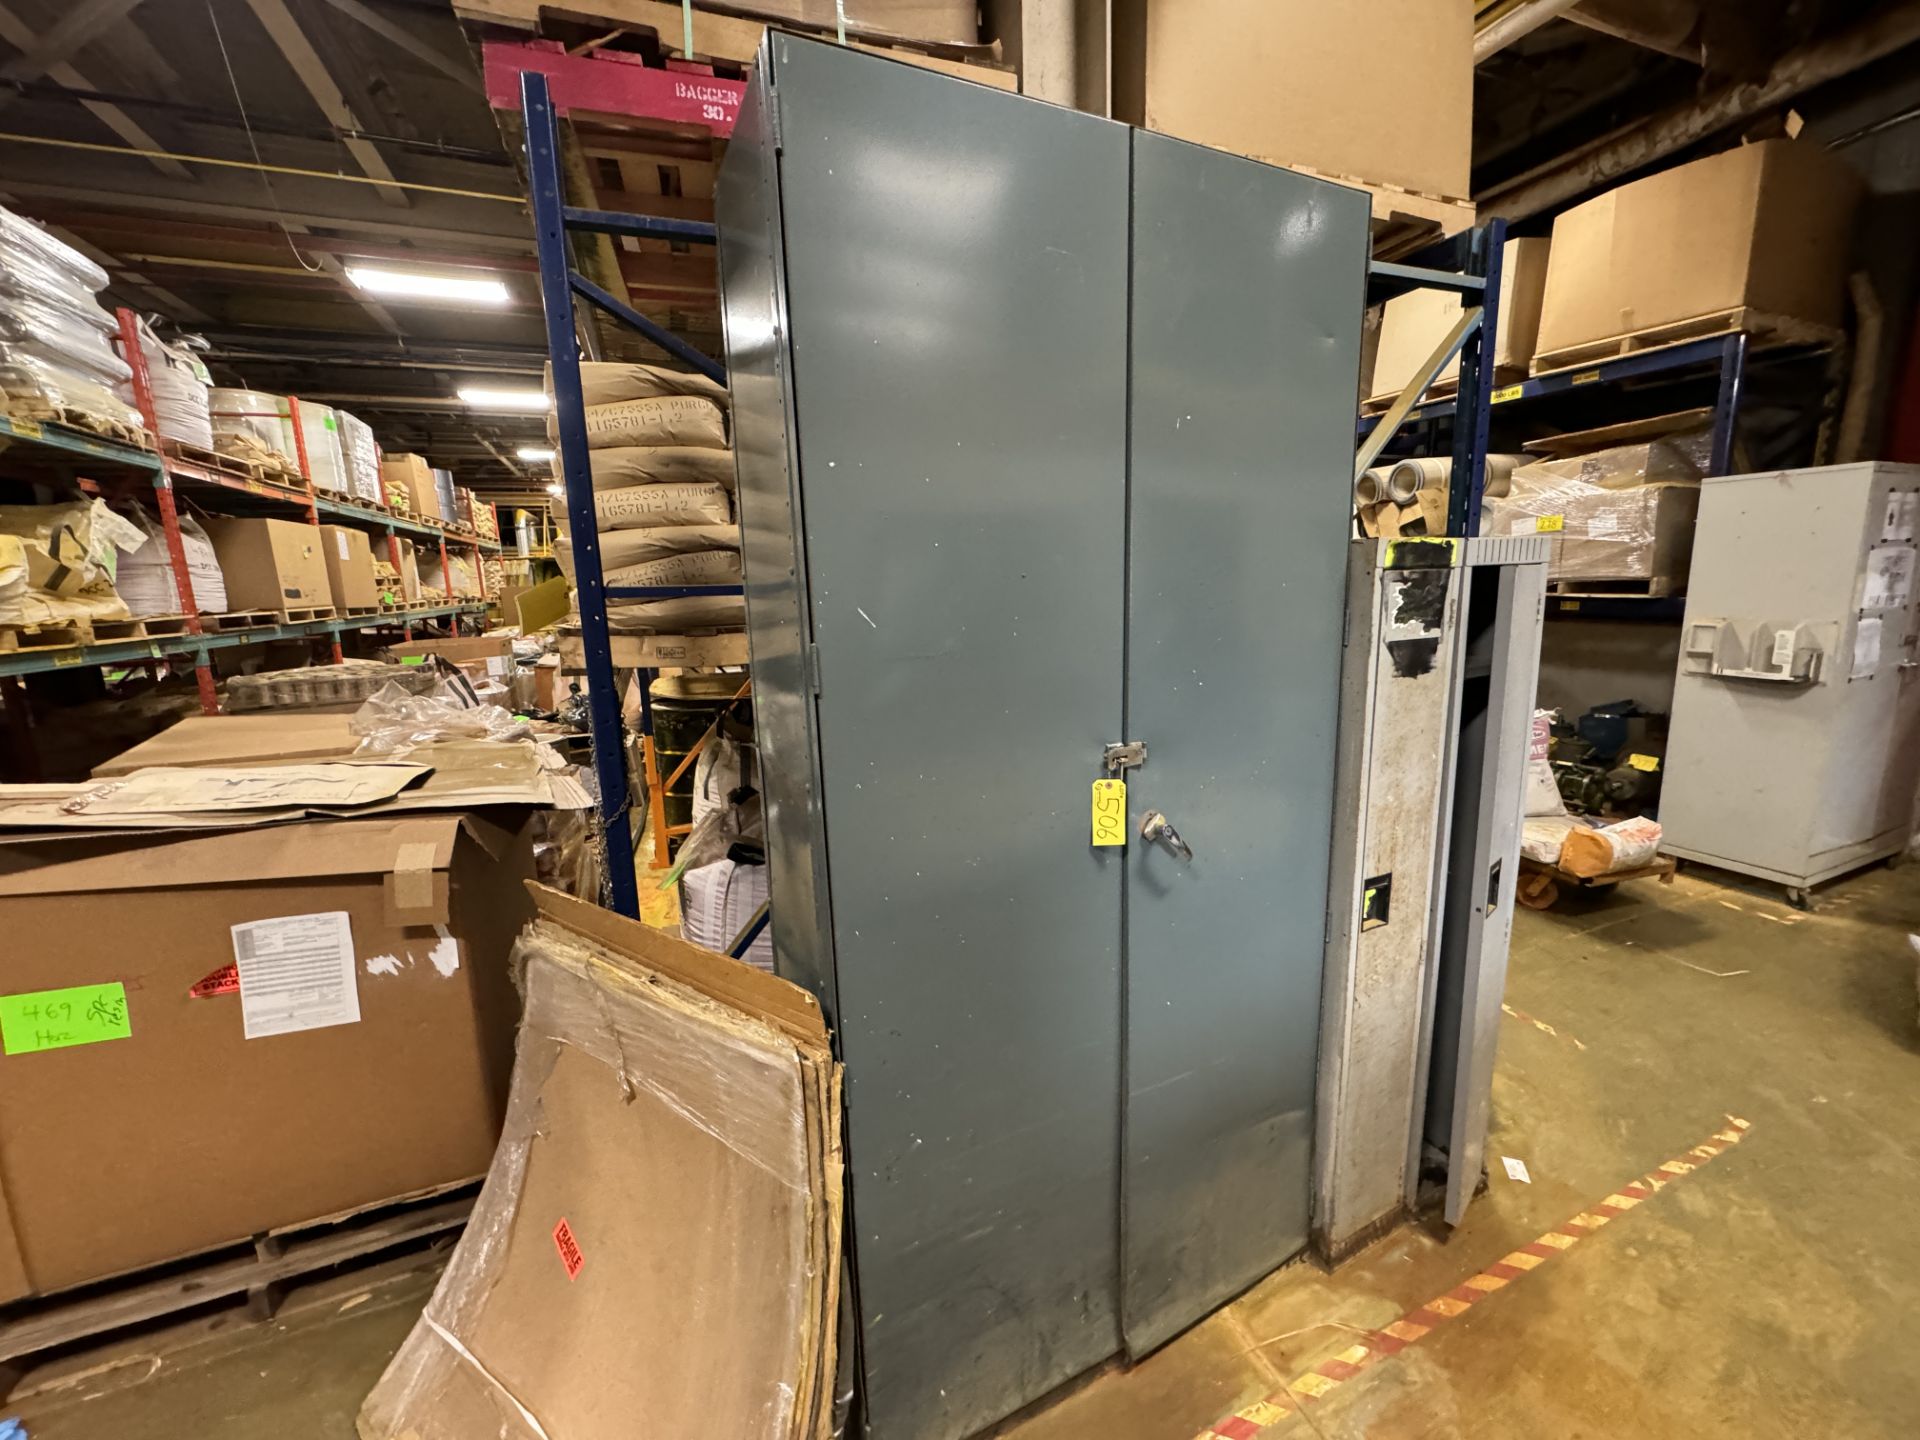 2-DOOR METAL STORAGE CABINET, APPROX. 8'H W/ SAFETY SUPPLIES AND CLEANERS - Image 2 of 2